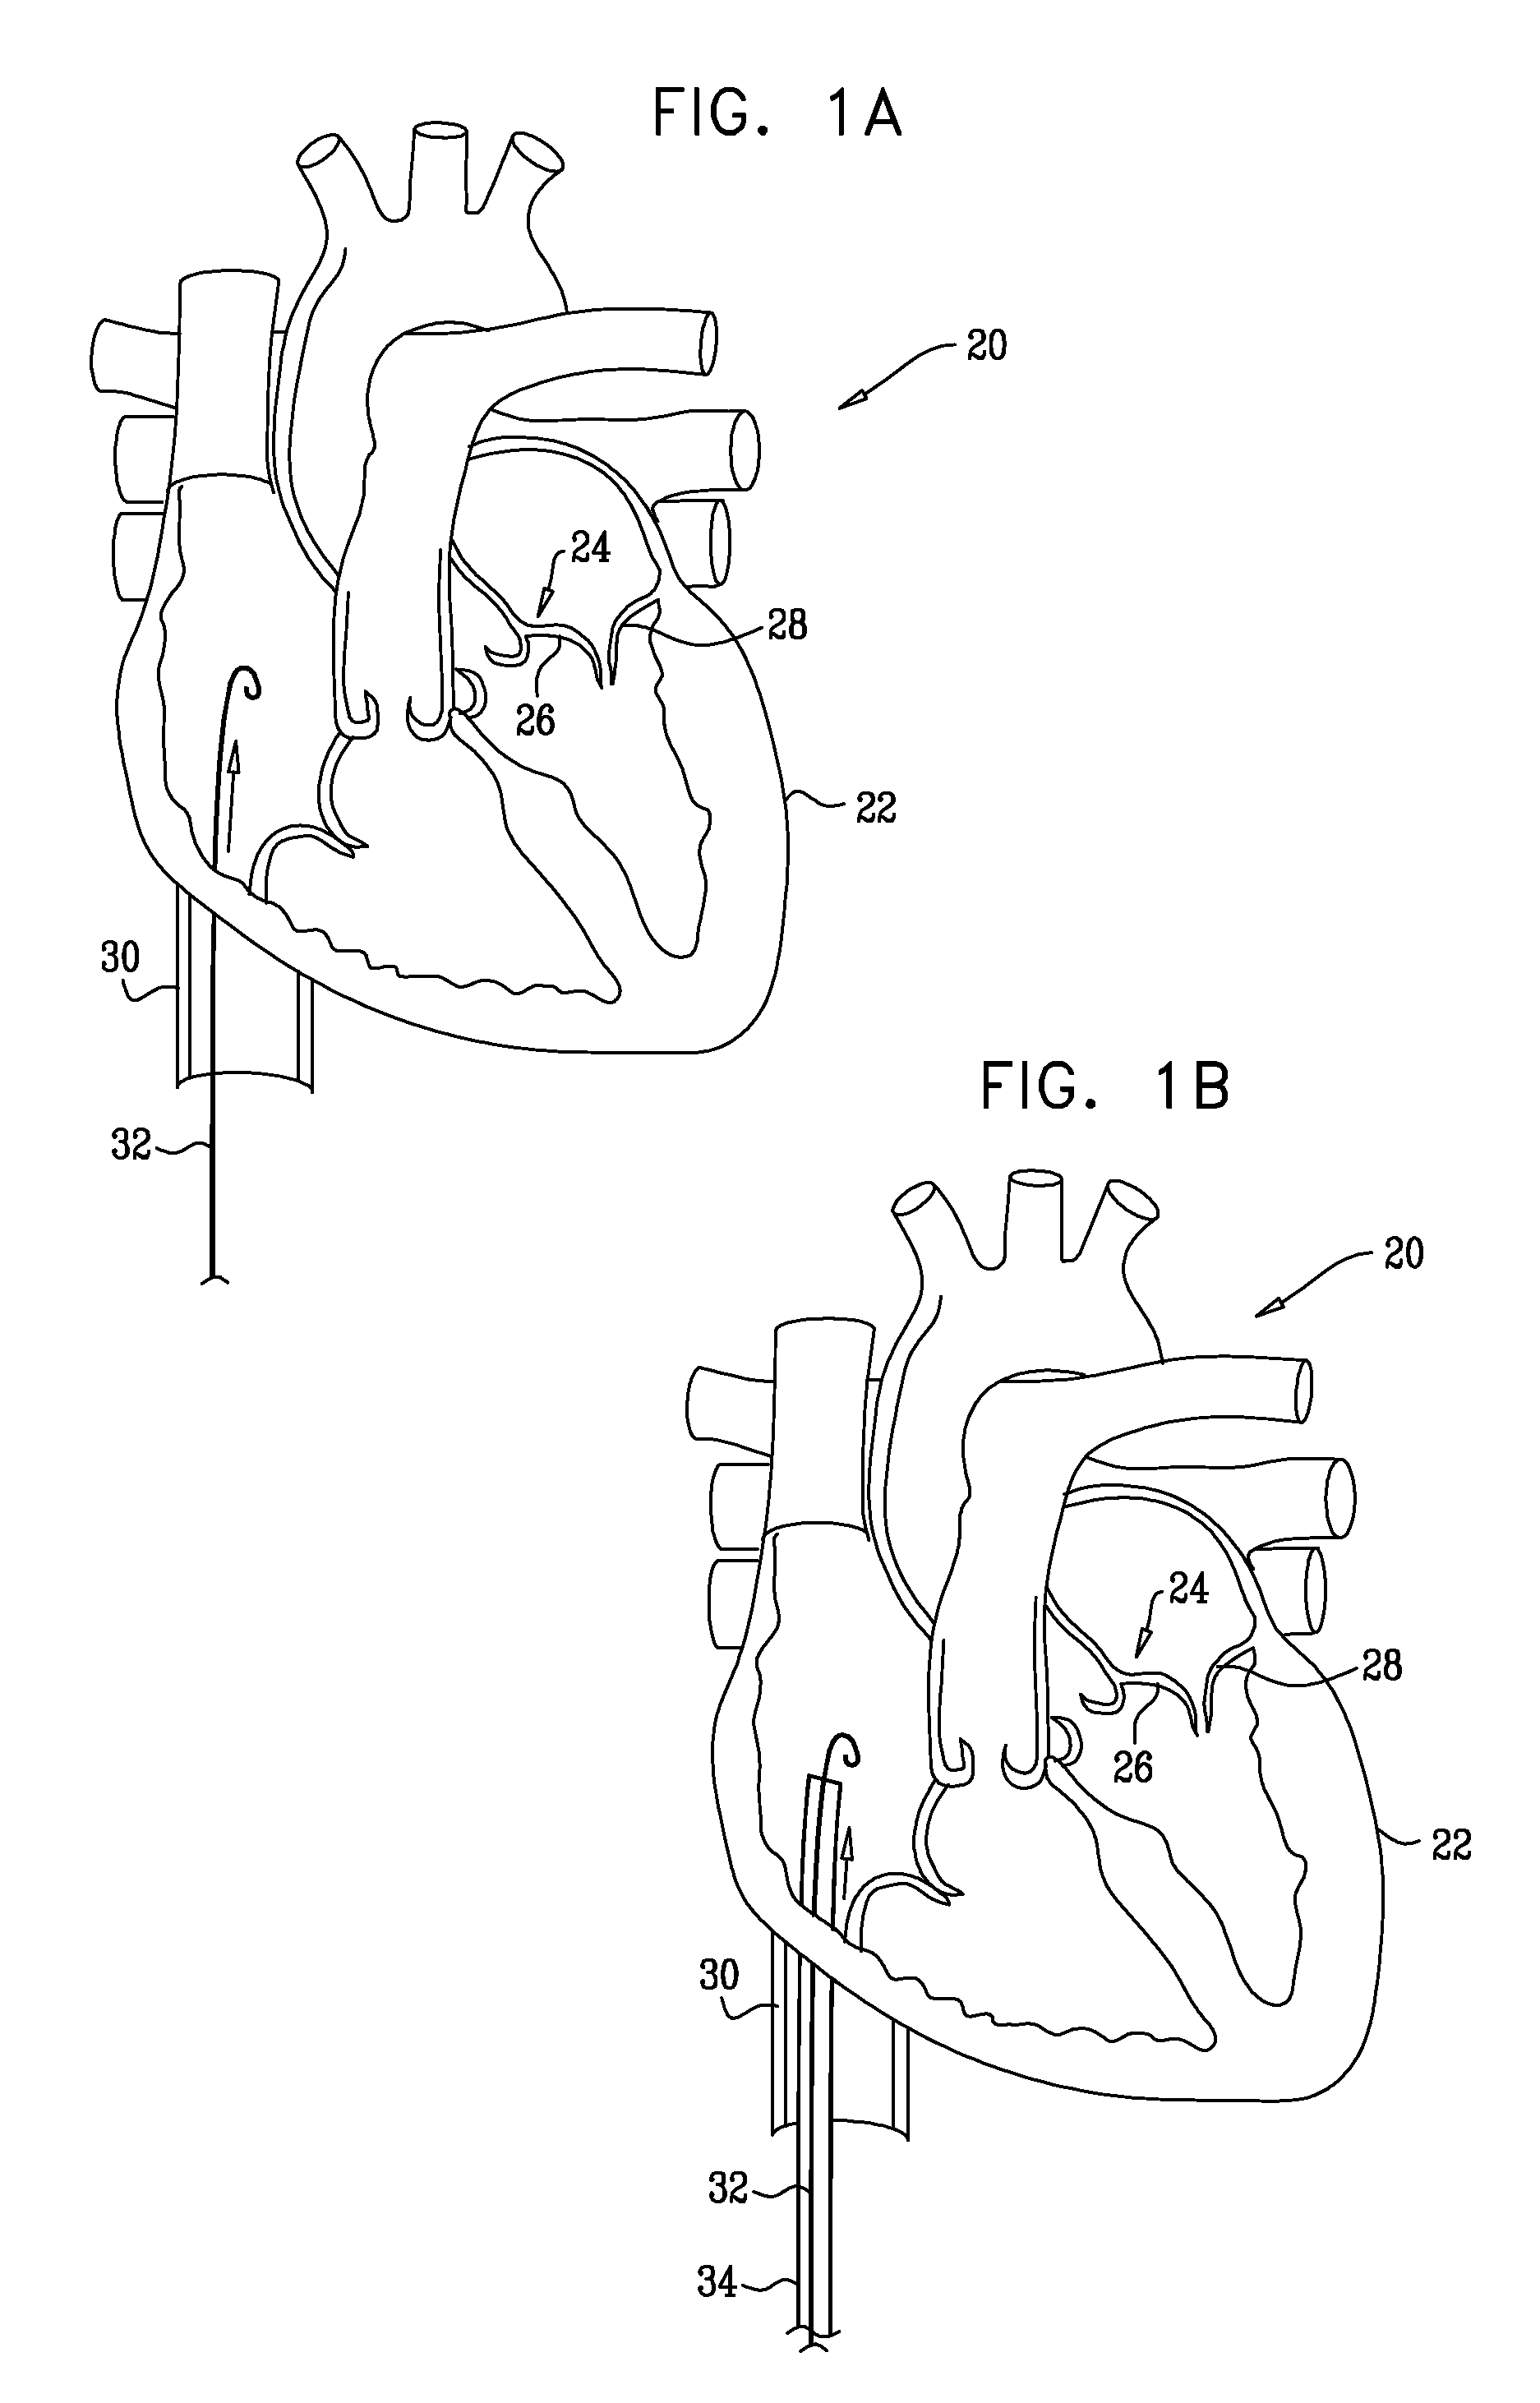 Tissue anchor for annuloplasty device